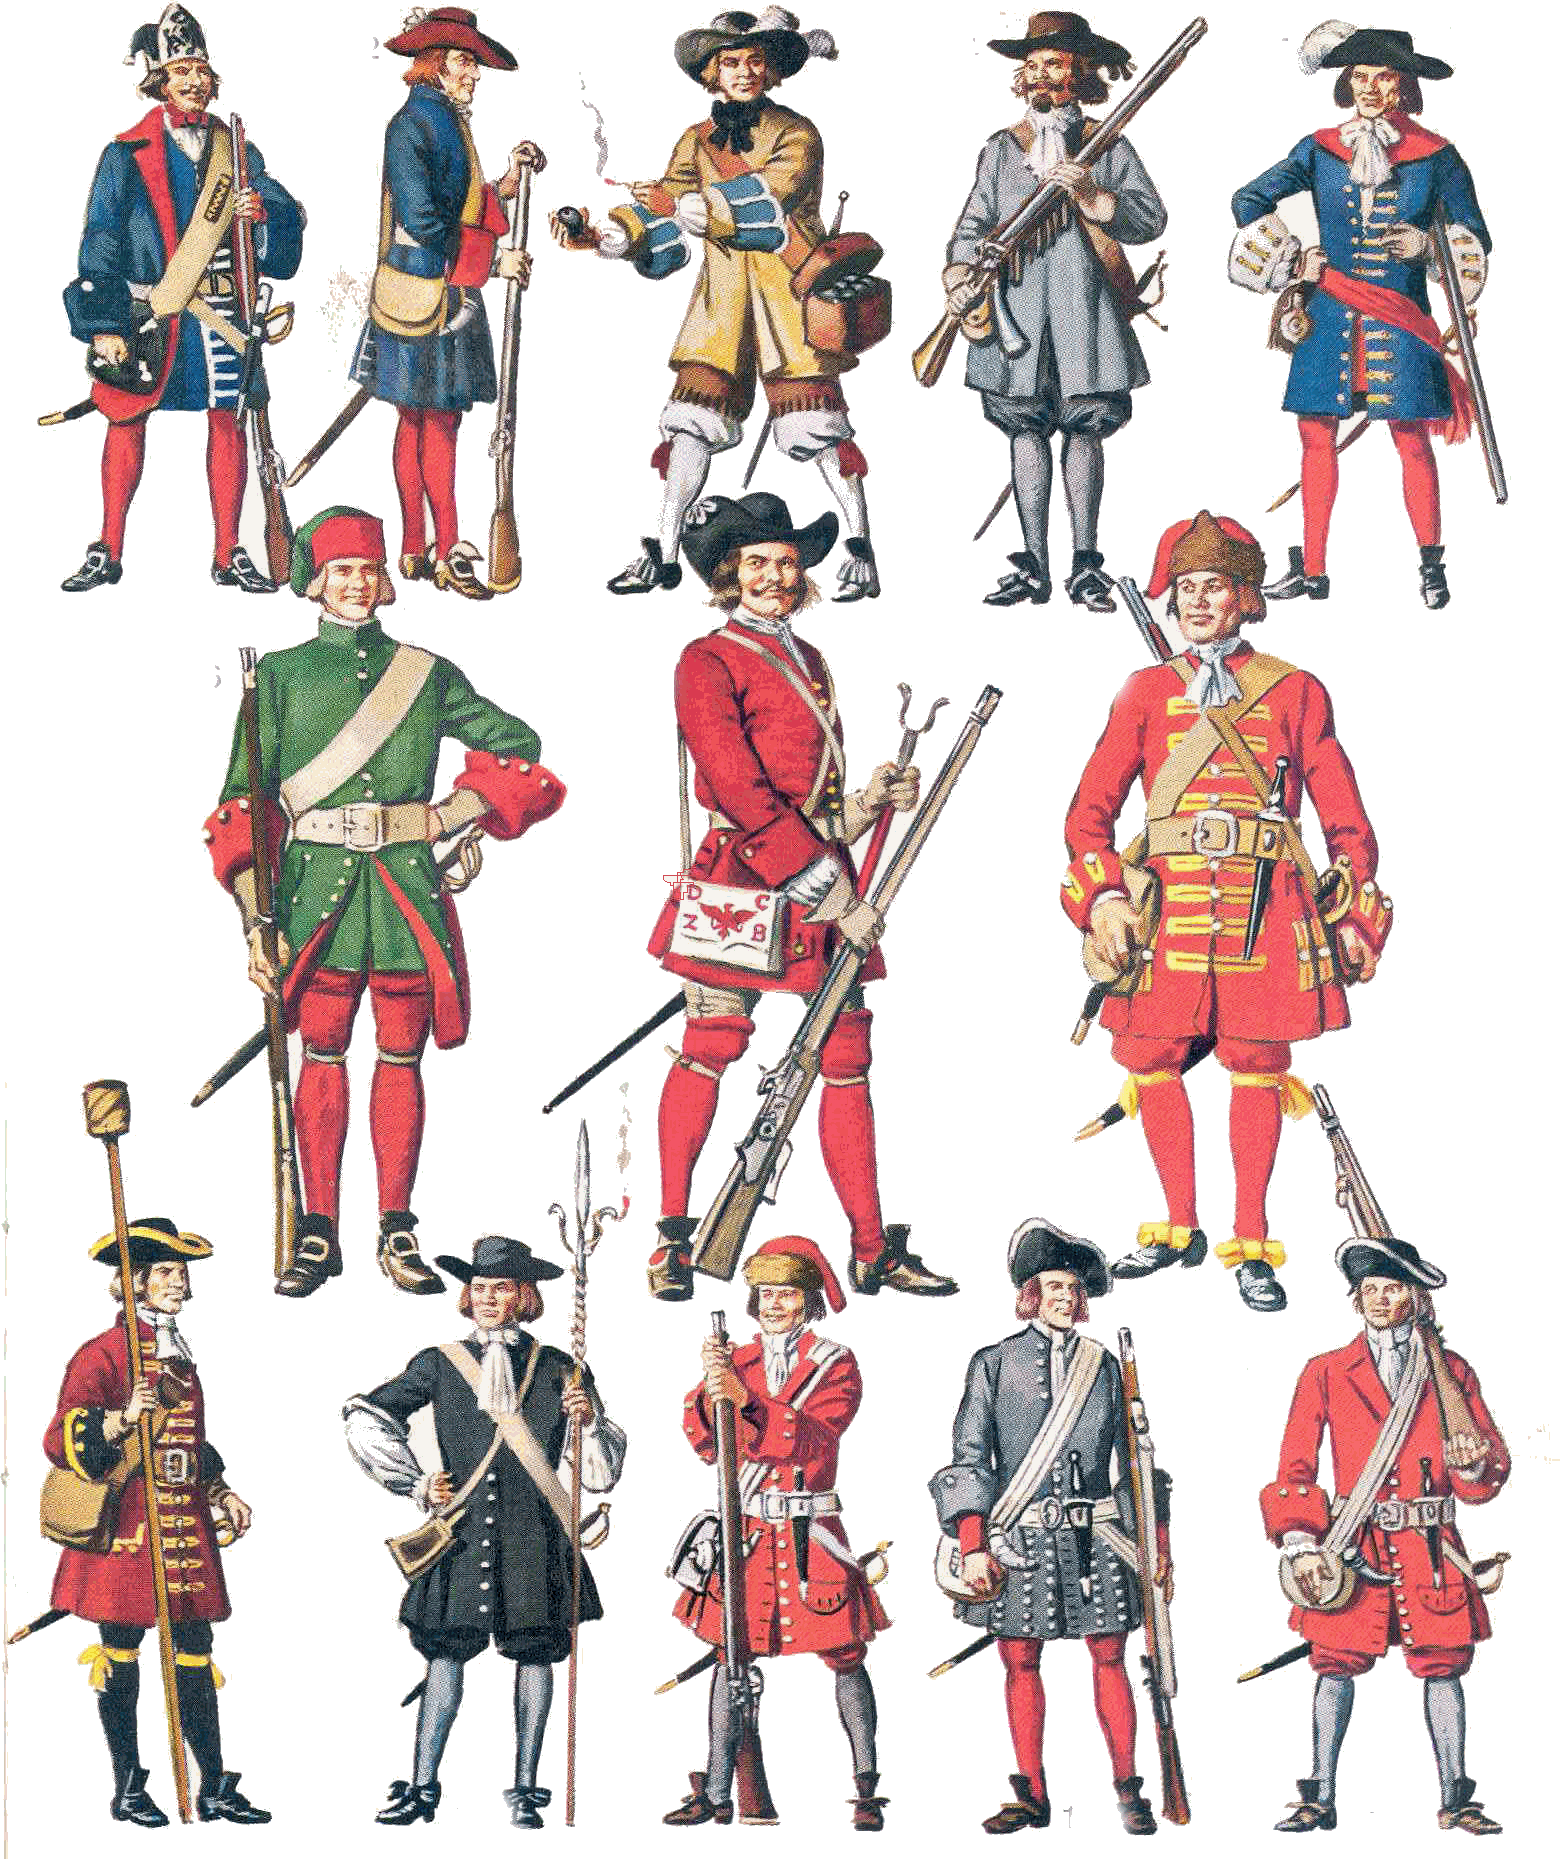 Troops of various periods of the C17 - those in centre and top LH are from Brandenburg